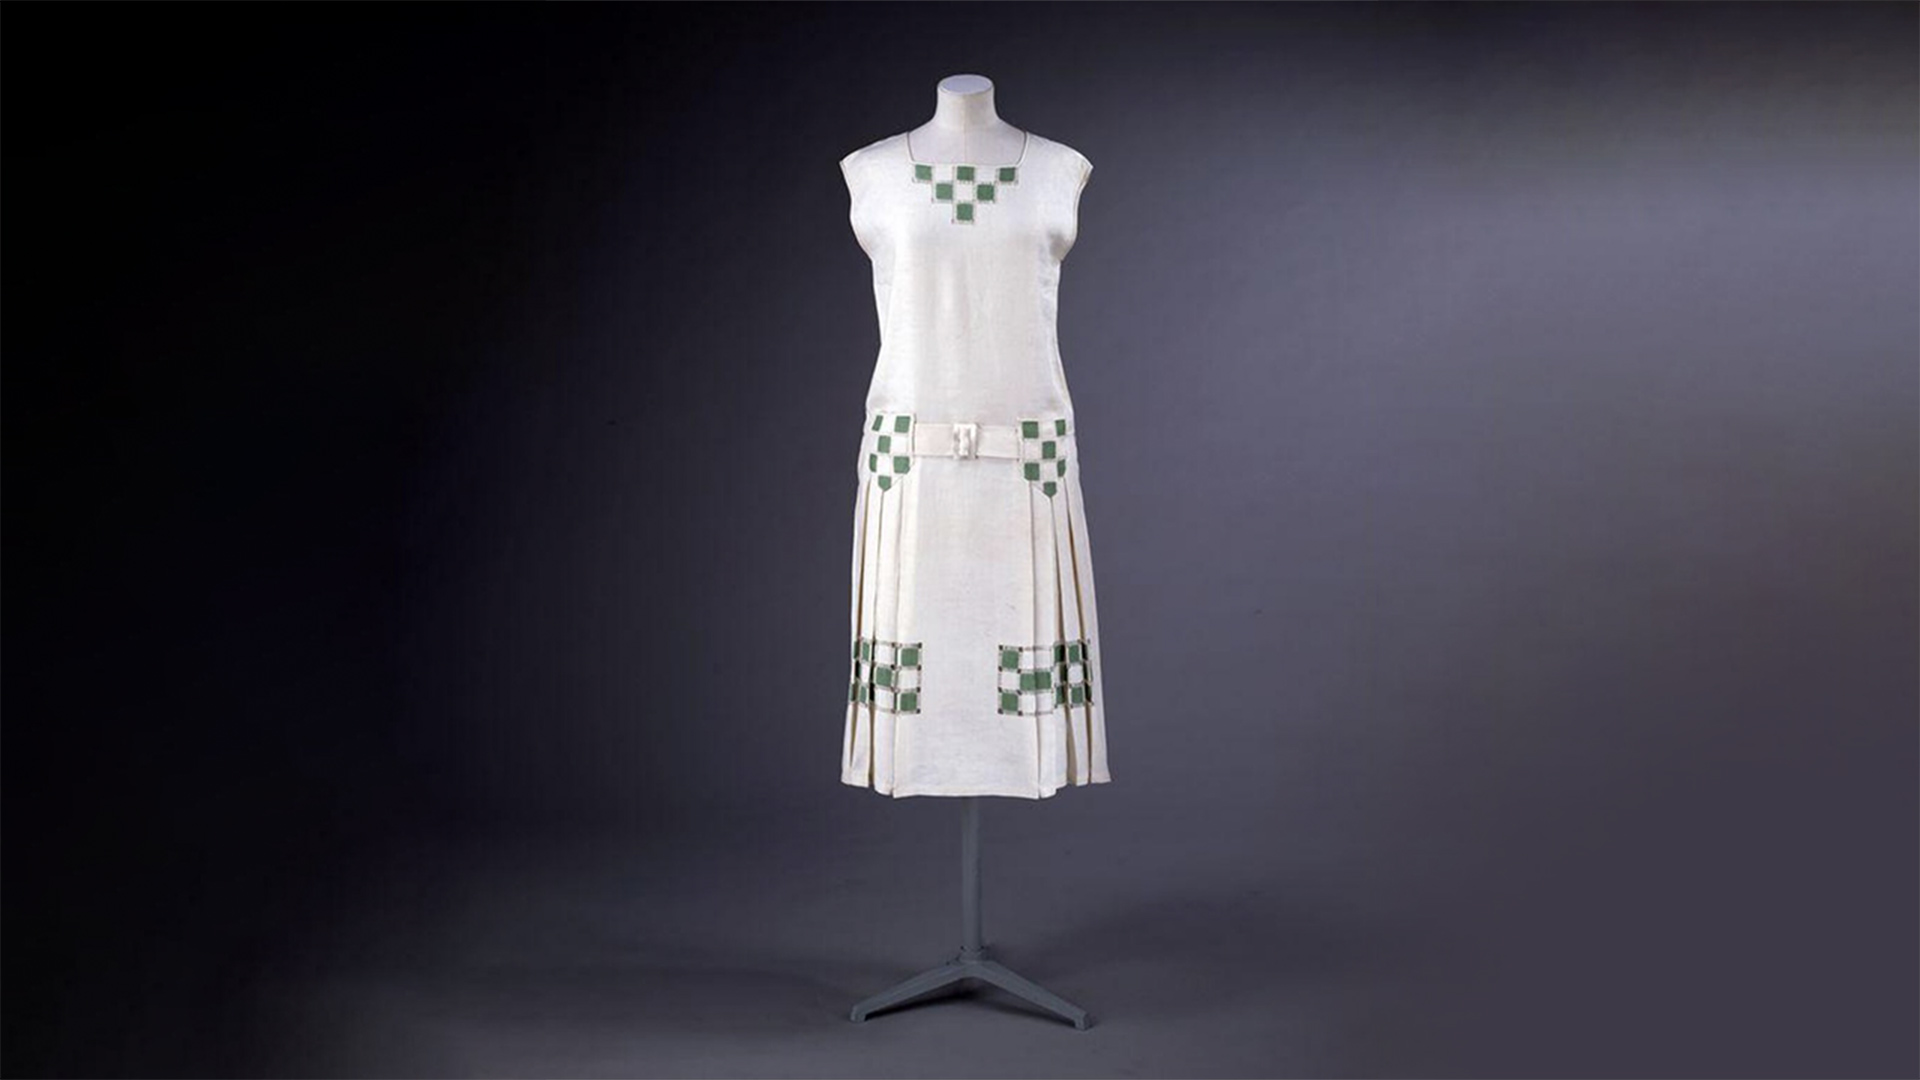 White tennis outfit with green squares